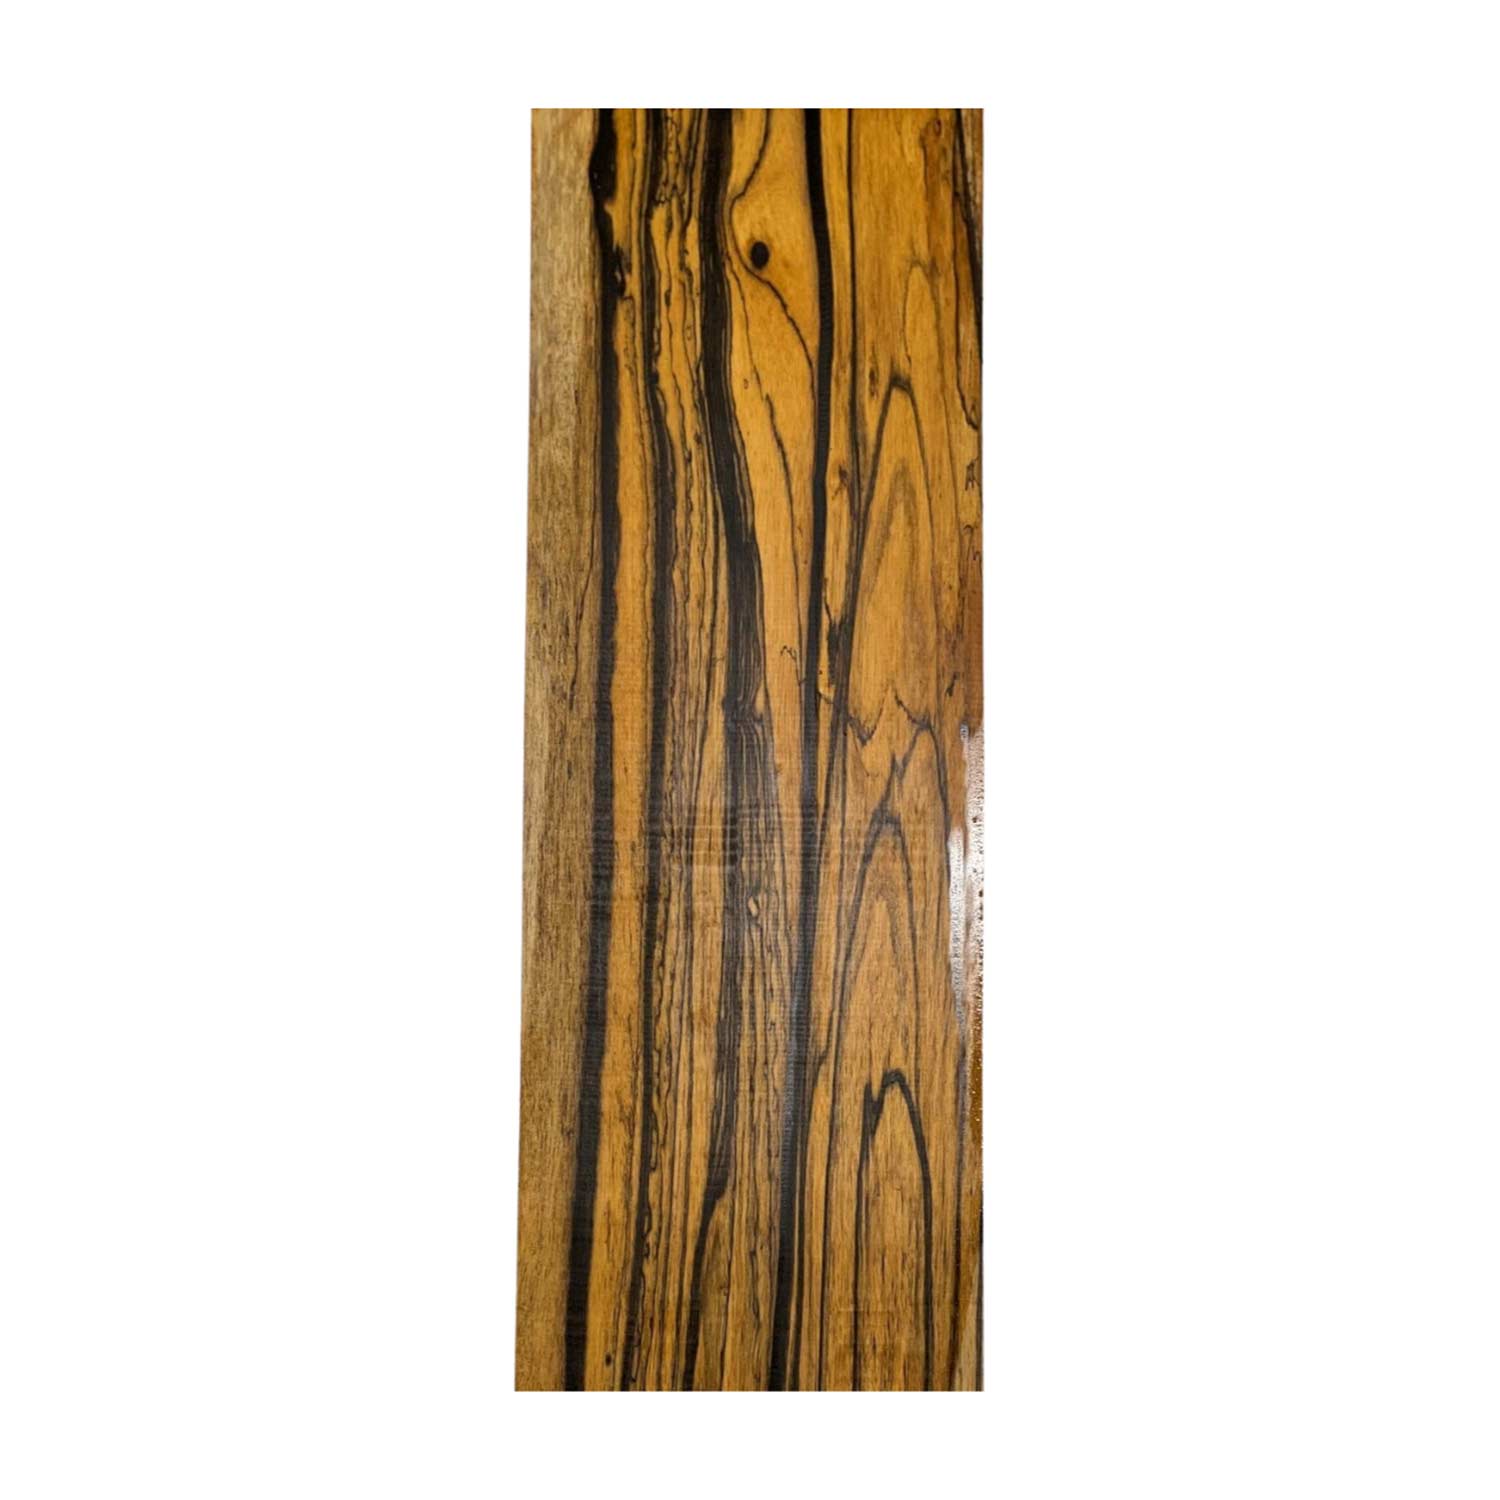 Black and White Ebony Lumber Board 38&quot;x 4&quot;x 5/8&quot; 